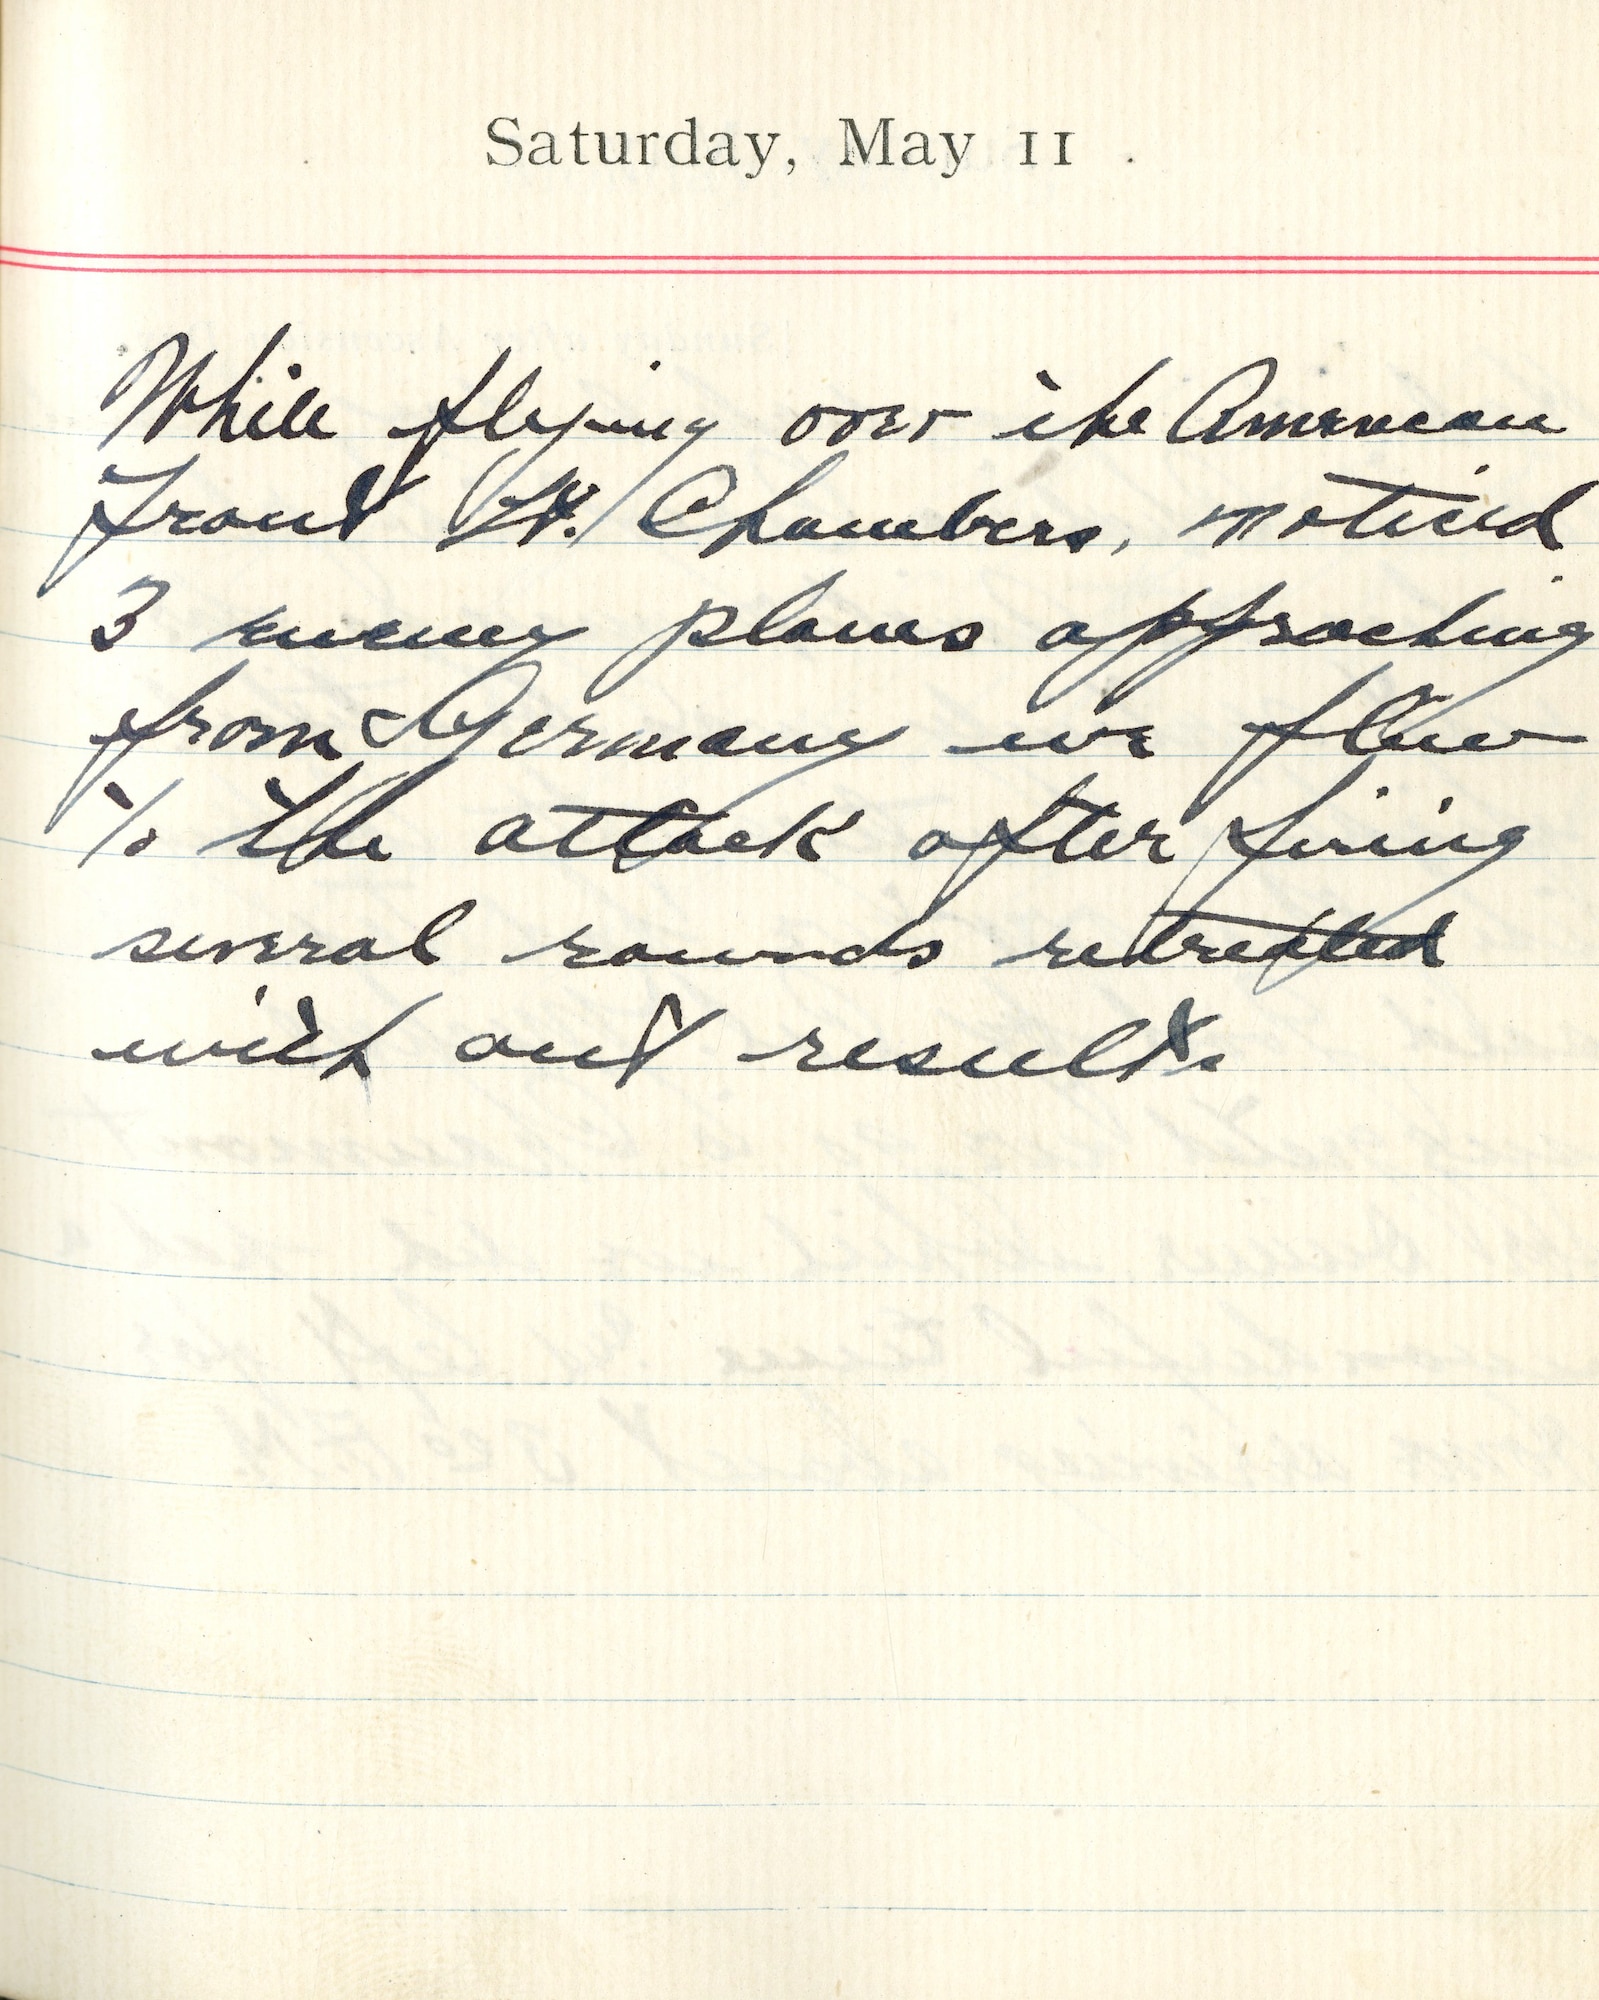 Capt. Edward V. Rickenbacker's 1918 wartime diary entry. (05/11/1918).

While flying over the American front, Lt. [Reed M.] Chambers noticed 3 enemy planes approaching from Germany.  We flew to the attack, after firing several rounds.  Retreated without result.